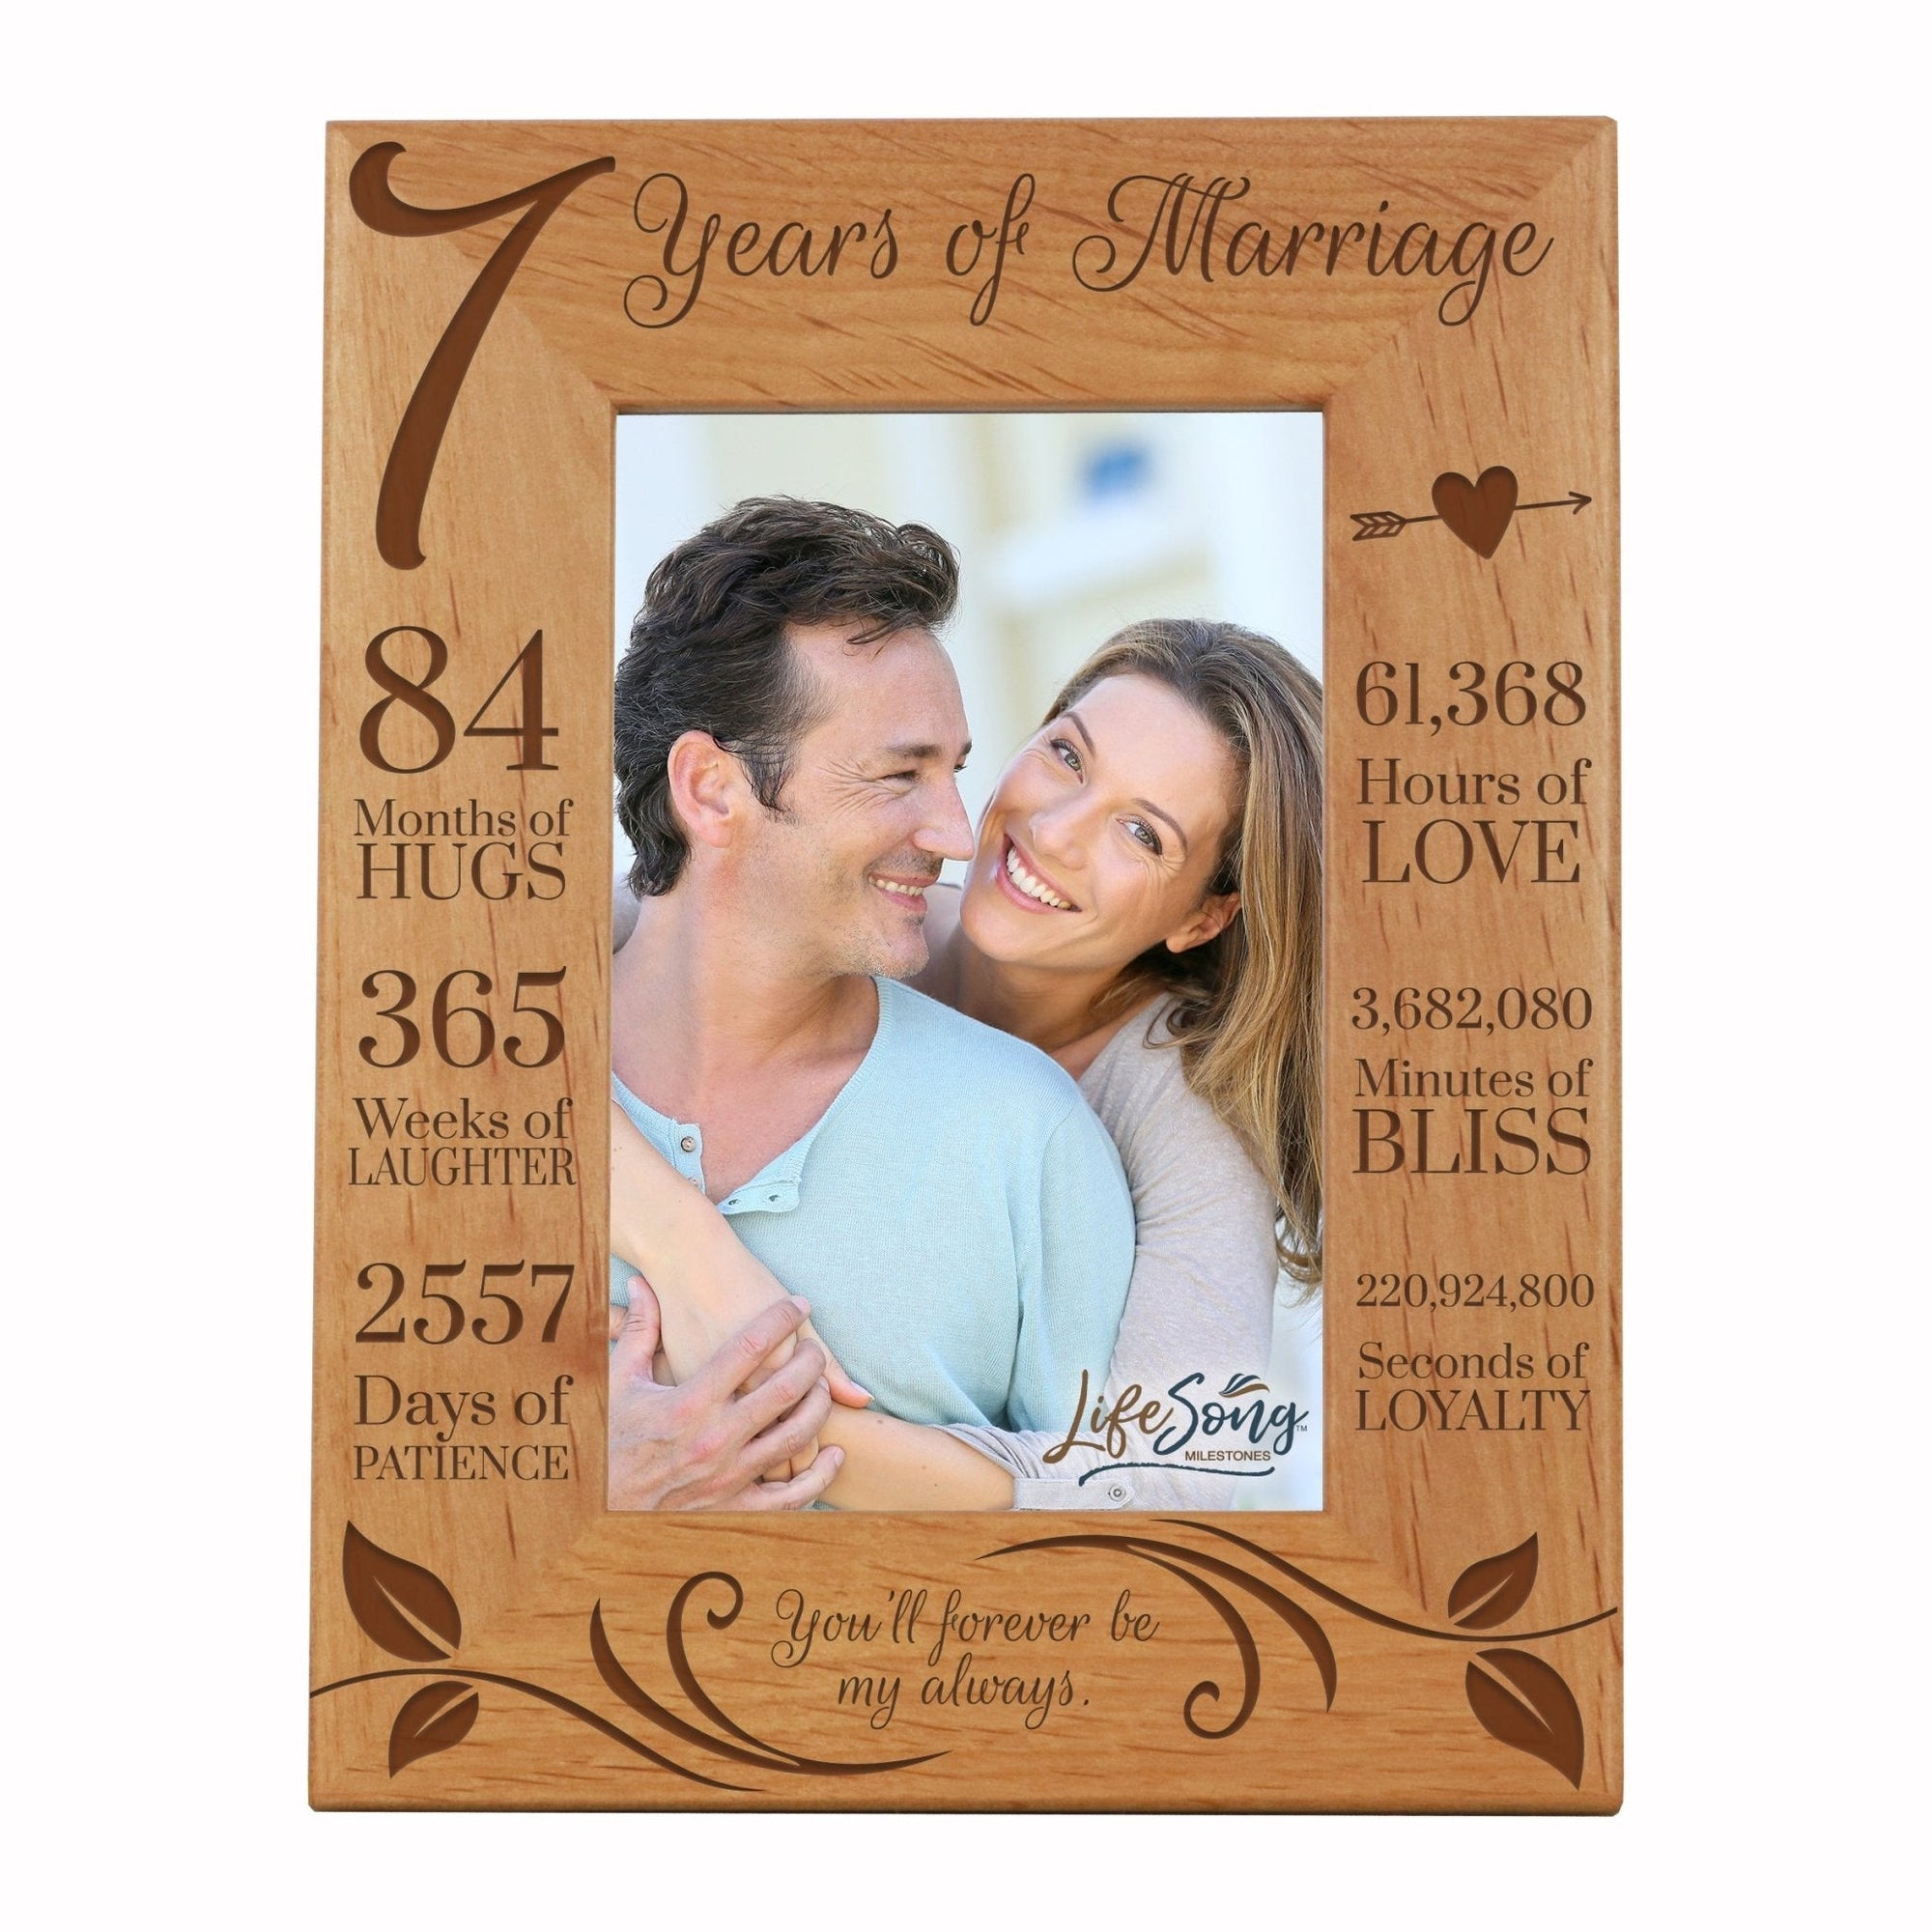 Engraved 7th Wedding Anniversary Photo Frame Wall Decor Gift for Couples - Forever Be My Always - LifeSong Milestones